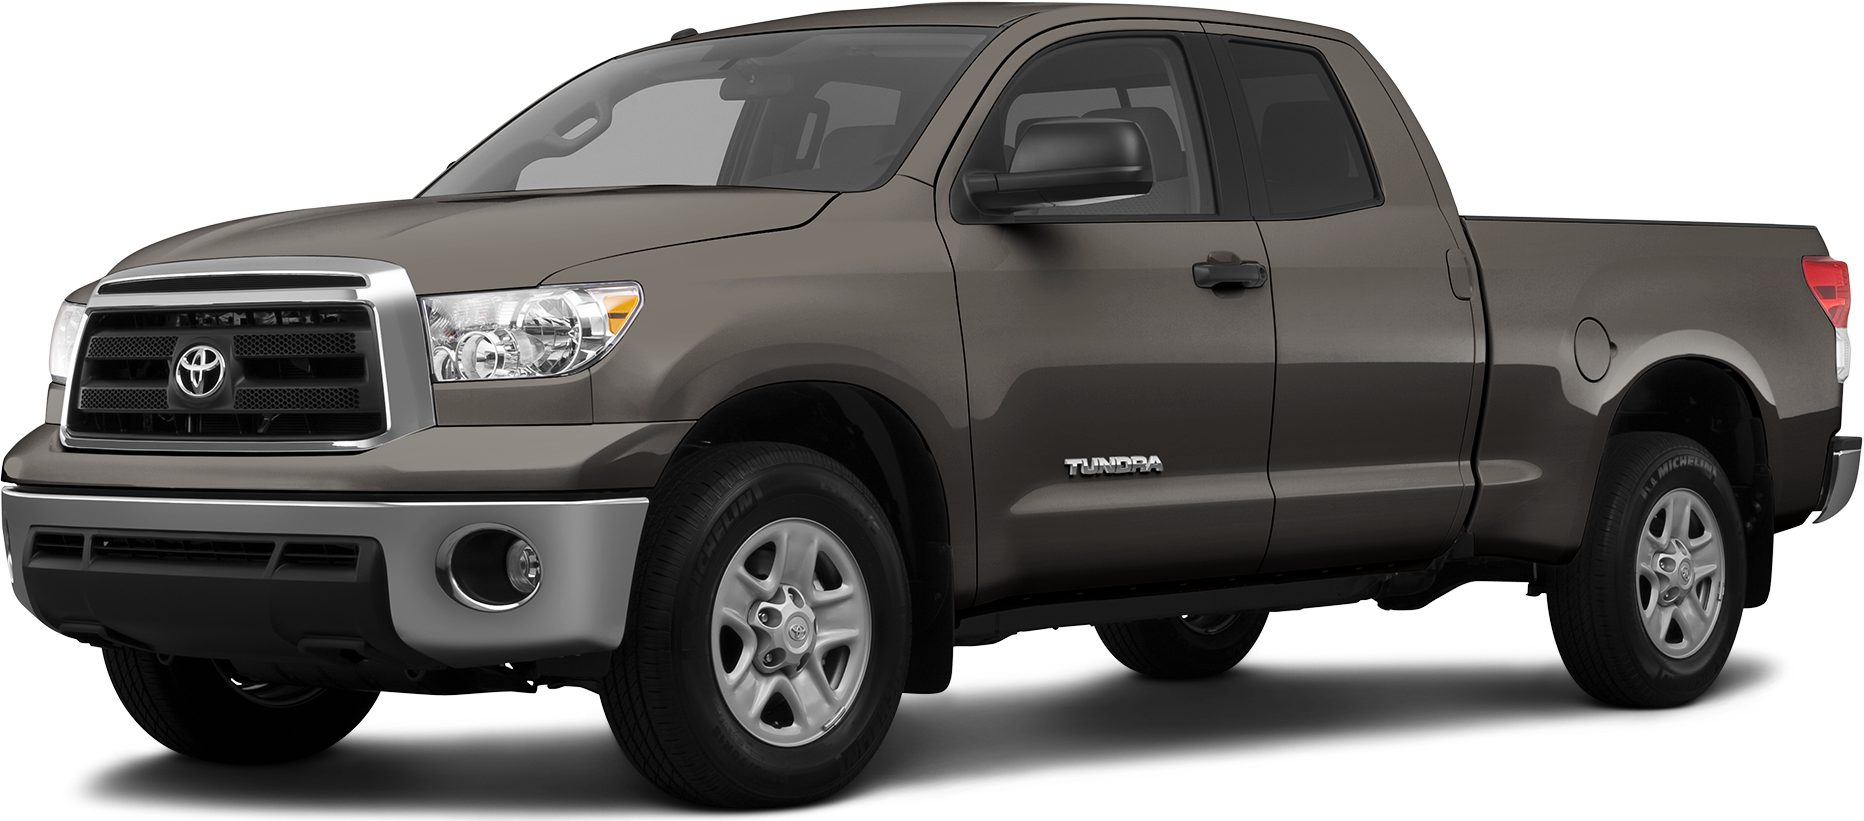 2013 Toyota Tundra Double Cab Specs and Features | Kelley Blue Book